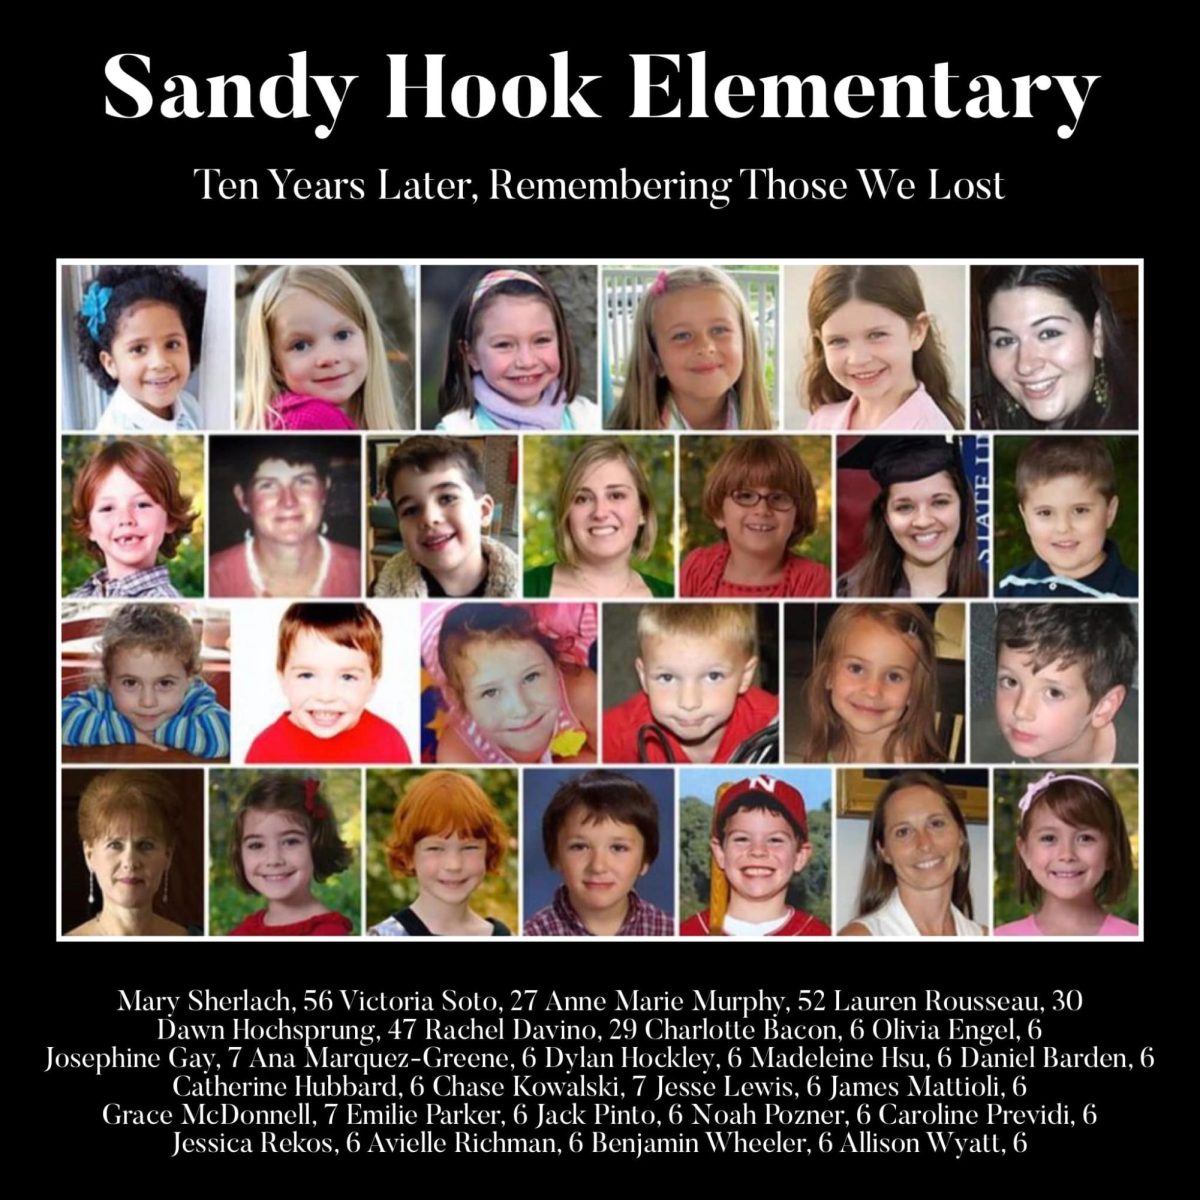 Thoughts on Sandy Hook, and how it has shaped a generation